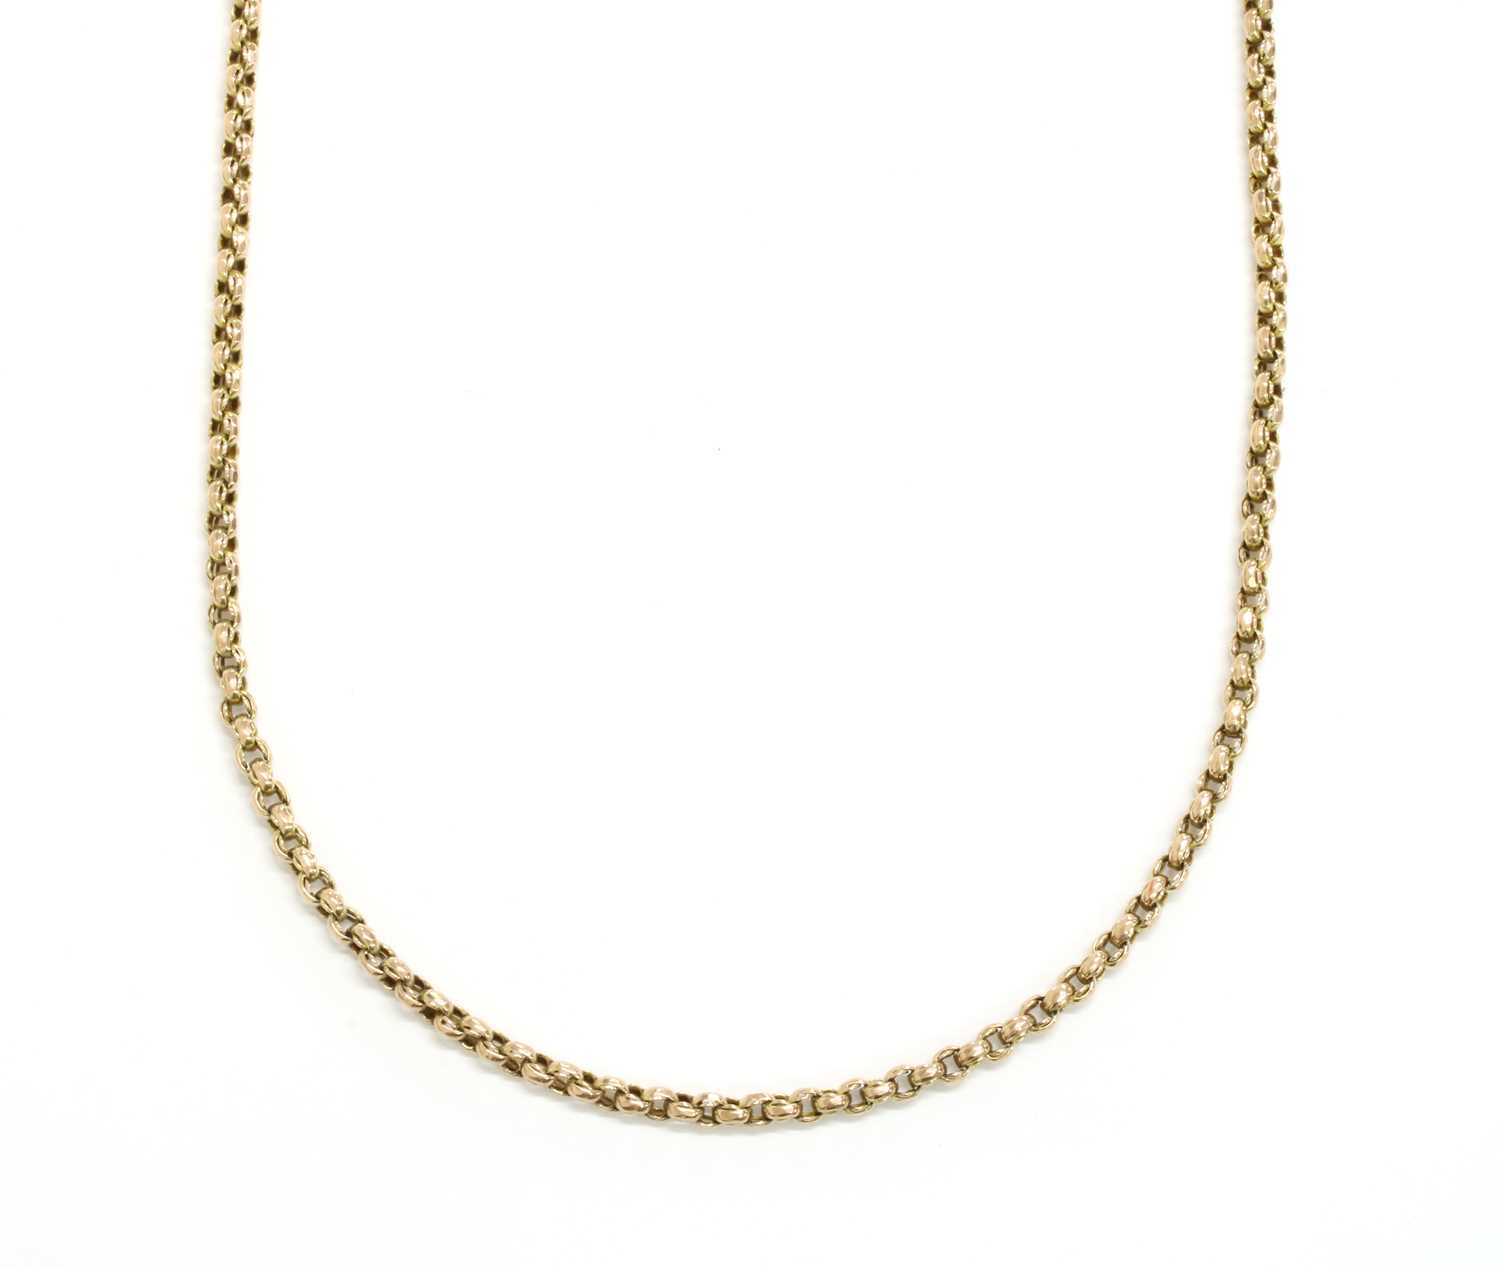 Lot 94 - A gold chain, c.1900